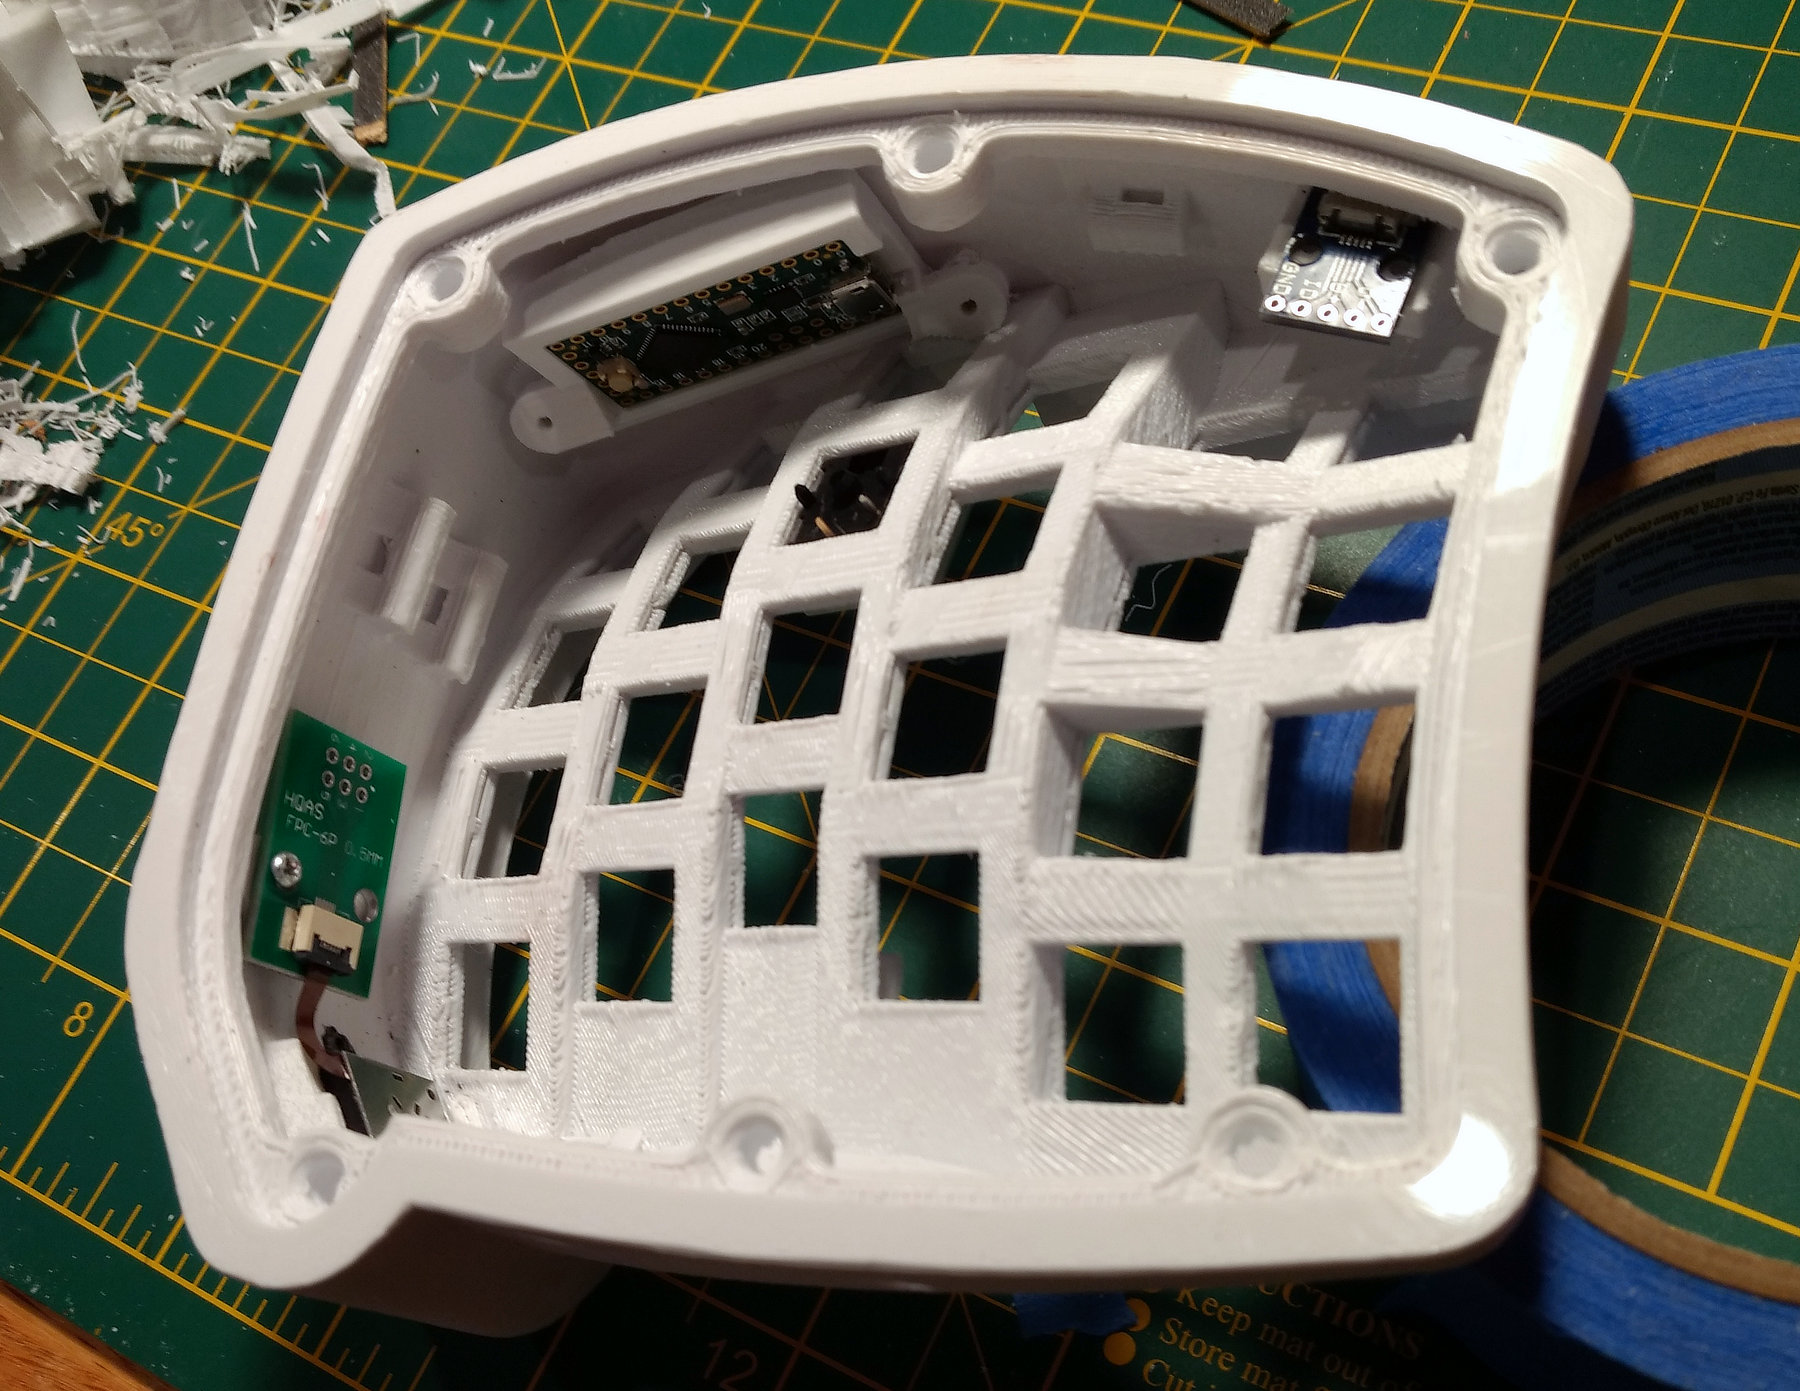 Underside of printed case with electronics mounted